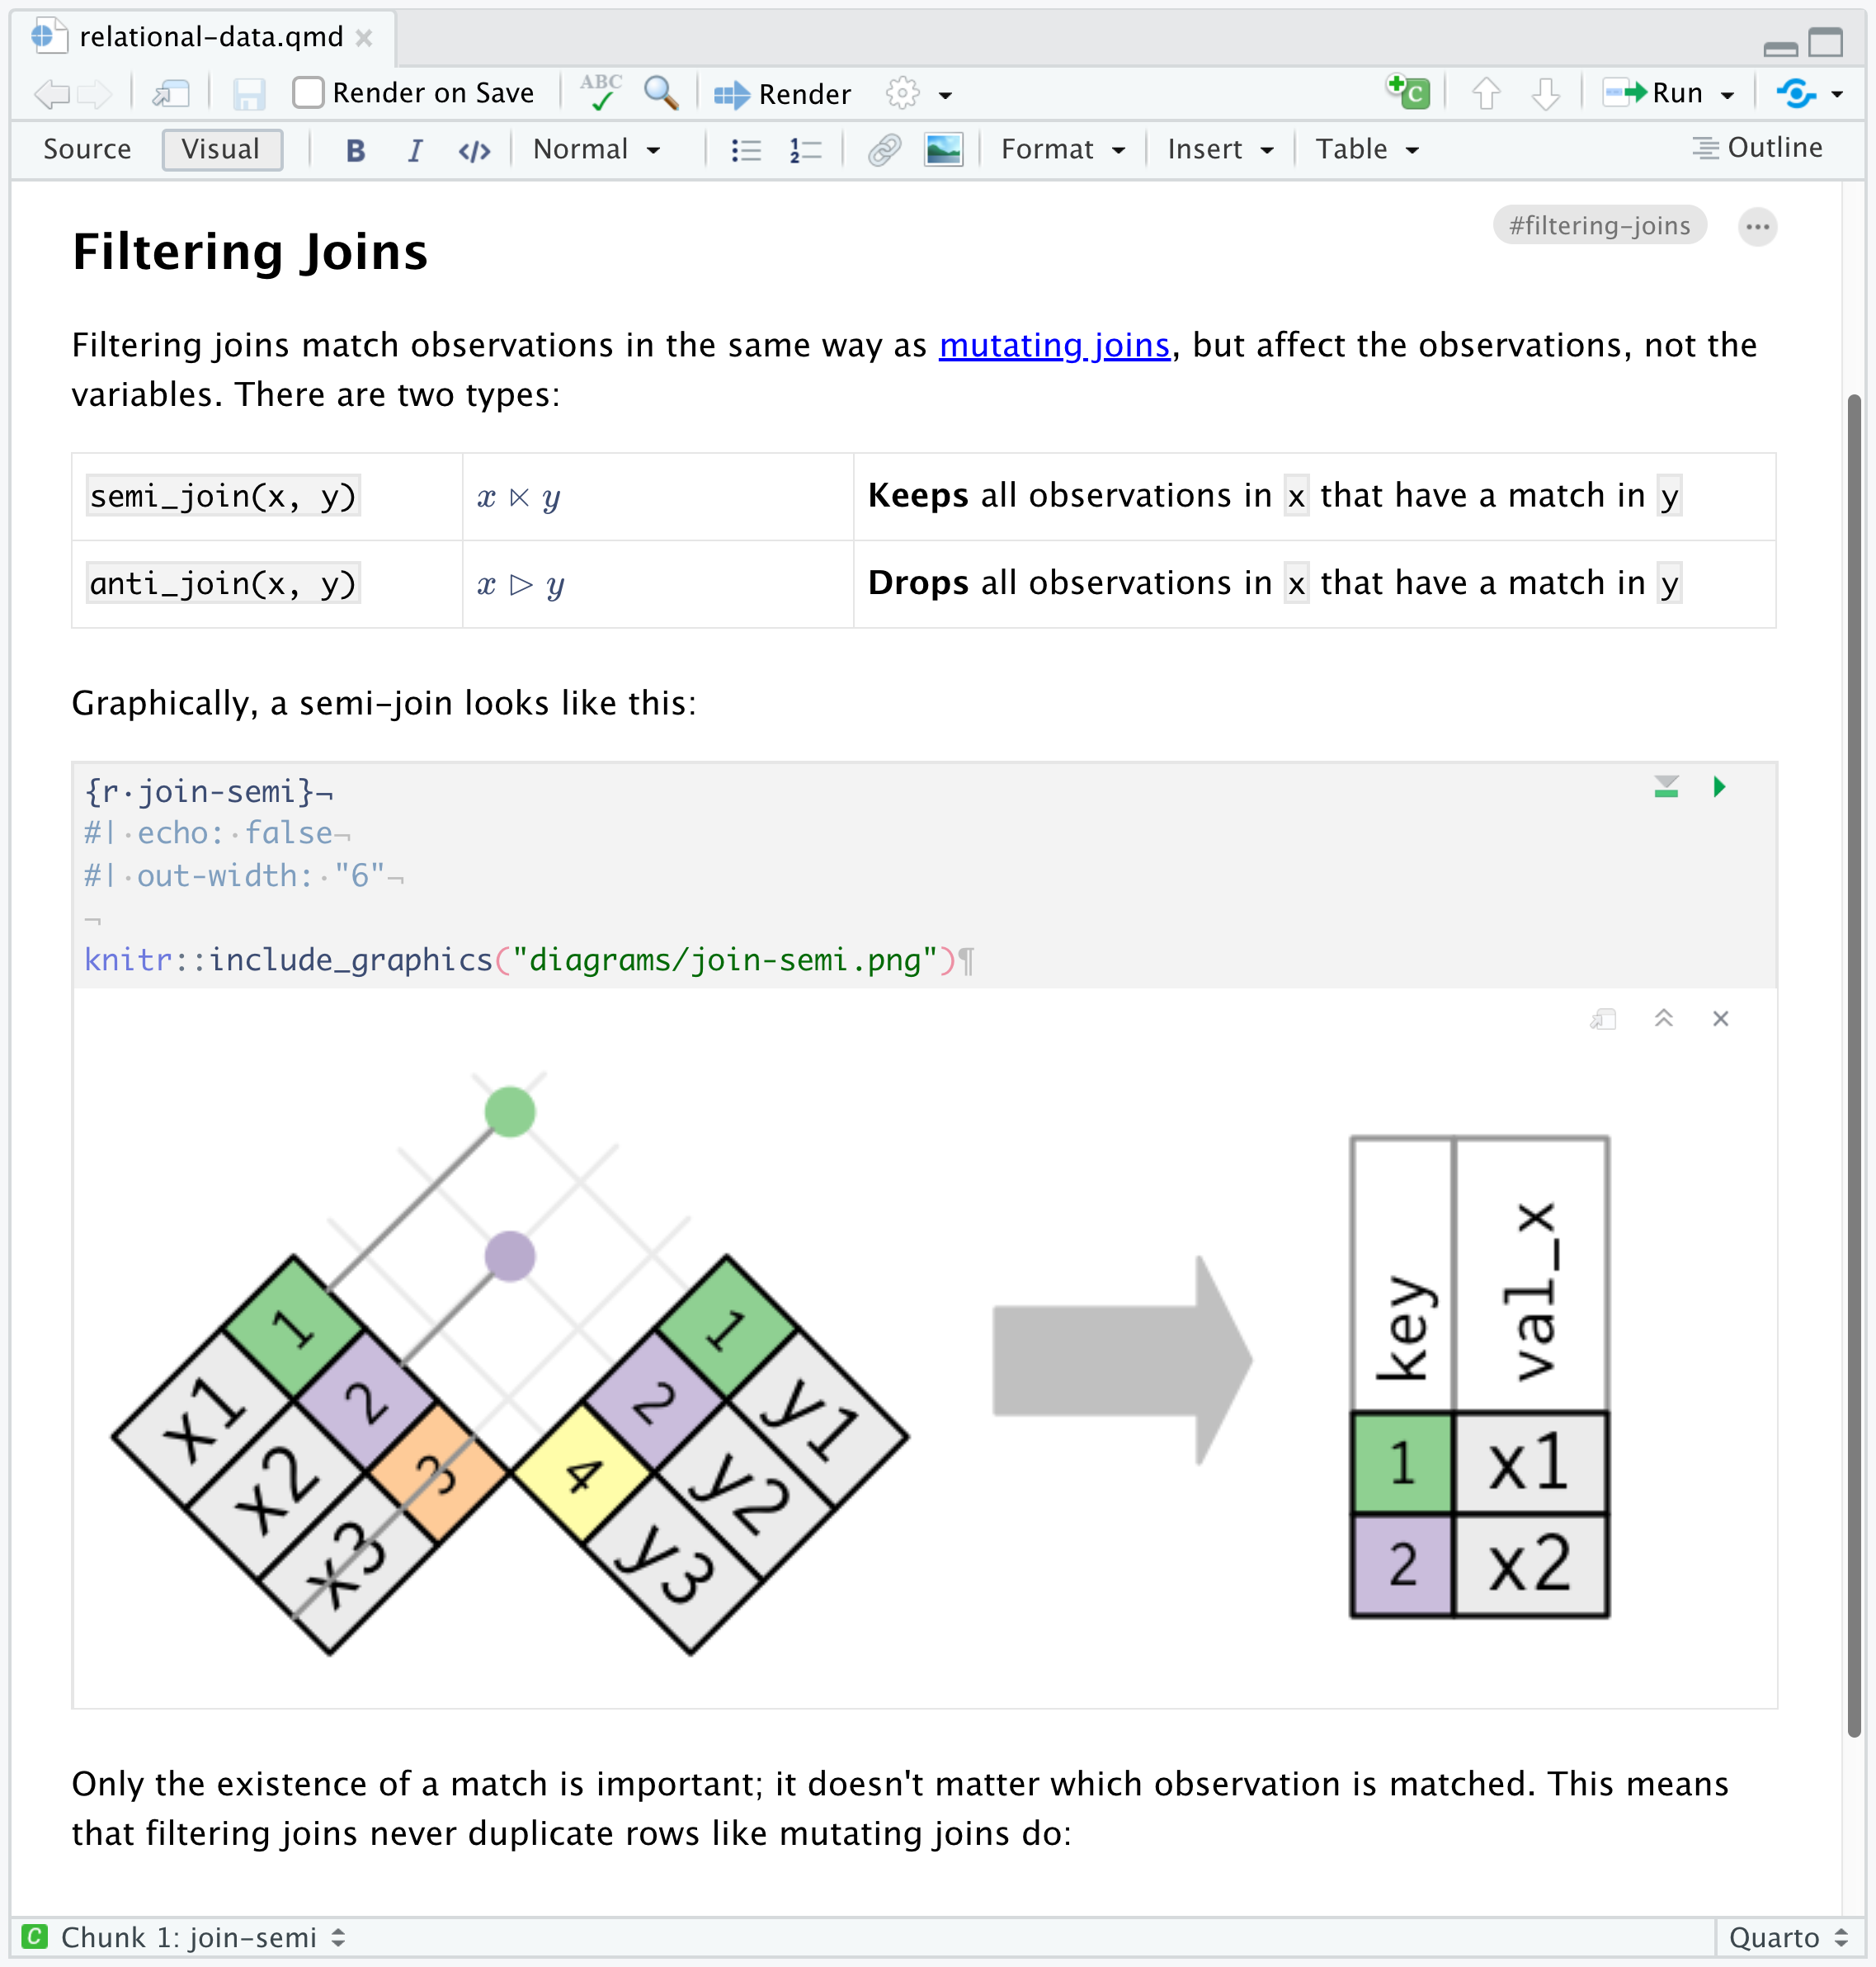 An RMarkdown file opened in the RStudio visual editor. The page is titled 'Filter joins'. Underneath is a table containing R syntax, mathematical notation, and definitions for the semi- and anti-joins. Underneath this table is an R code chunk that displays a graphical representation of a semi-join.